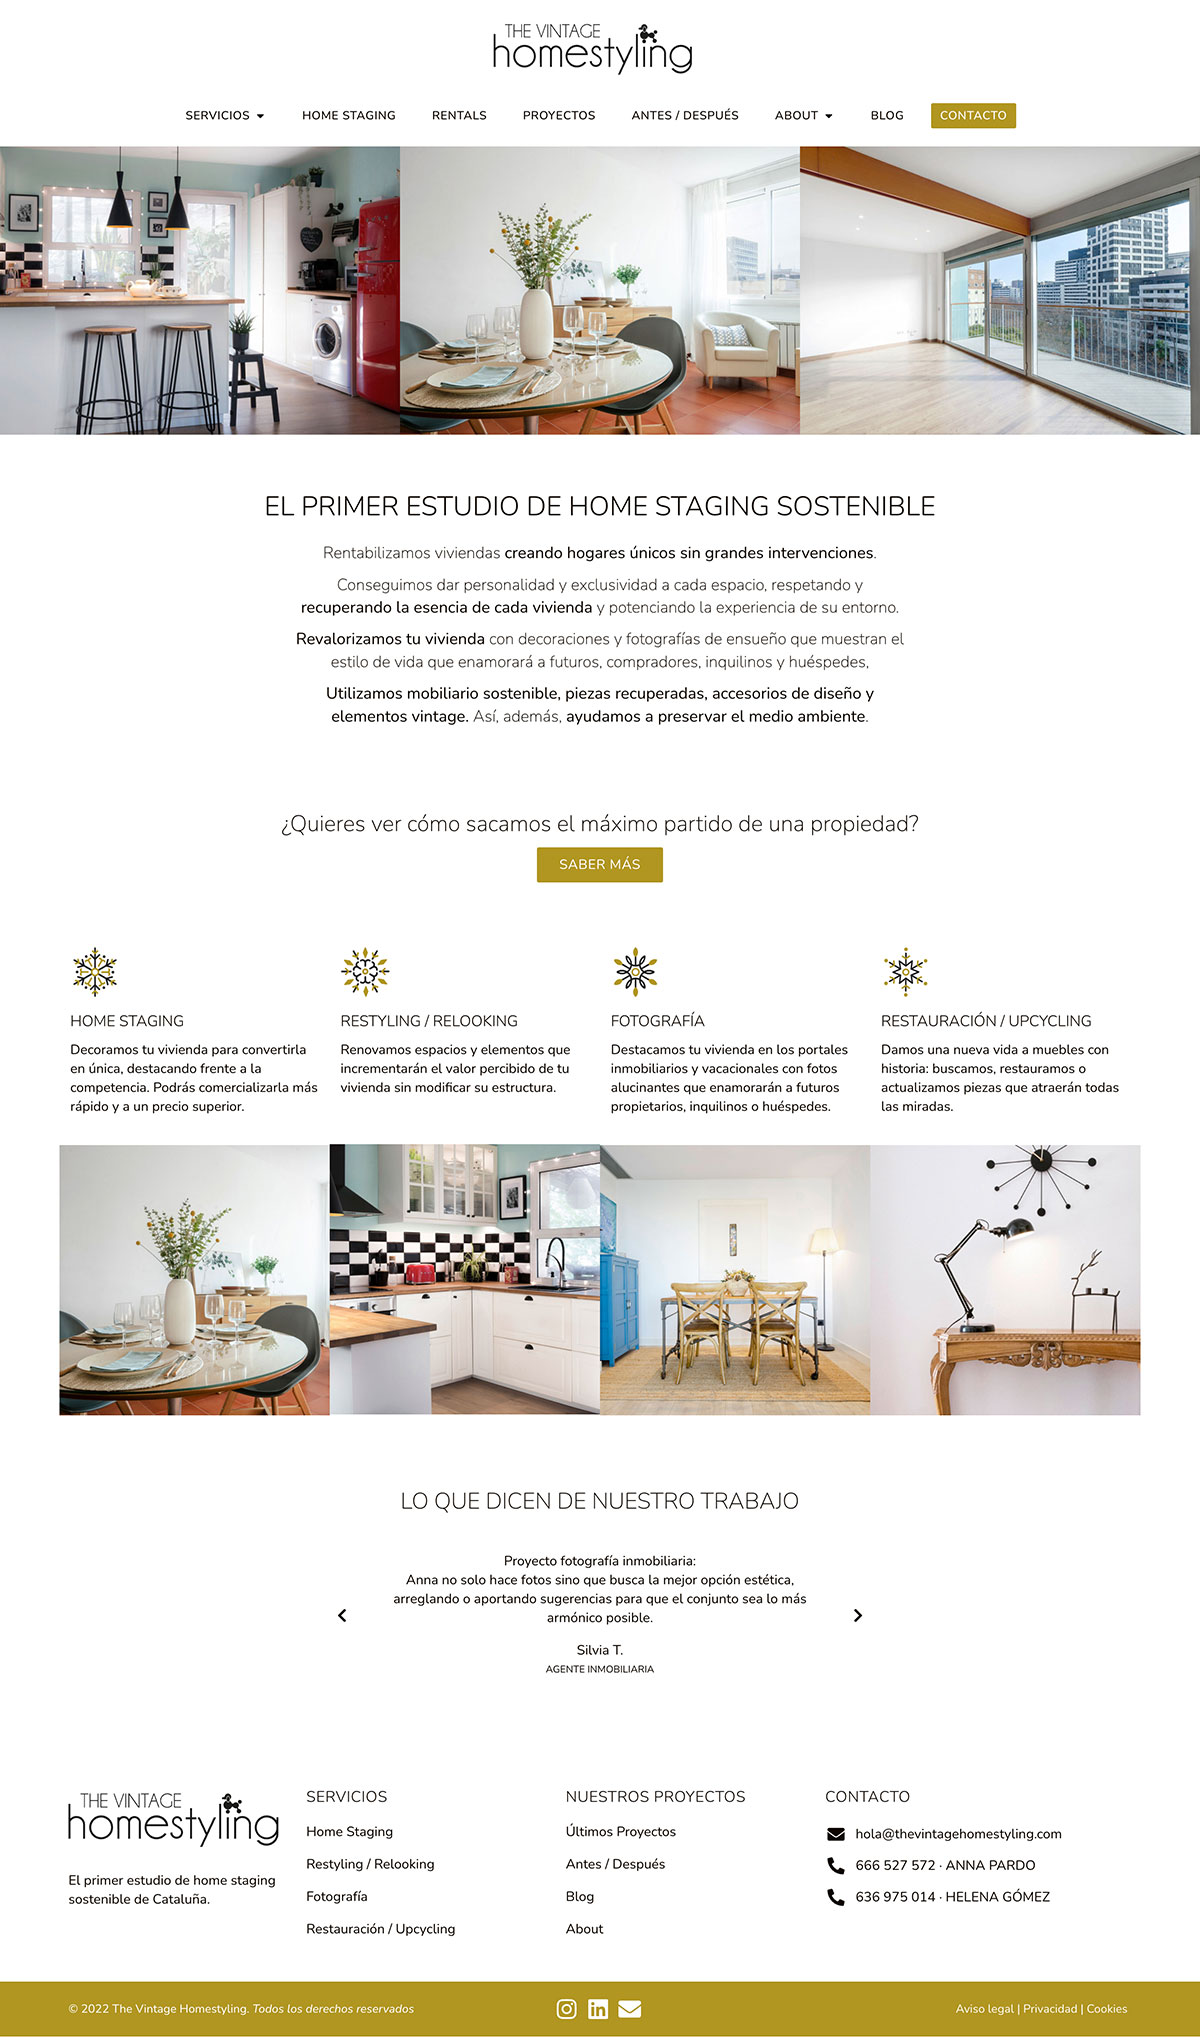 The Vintage Homestyling - Home Staging - Diseño web